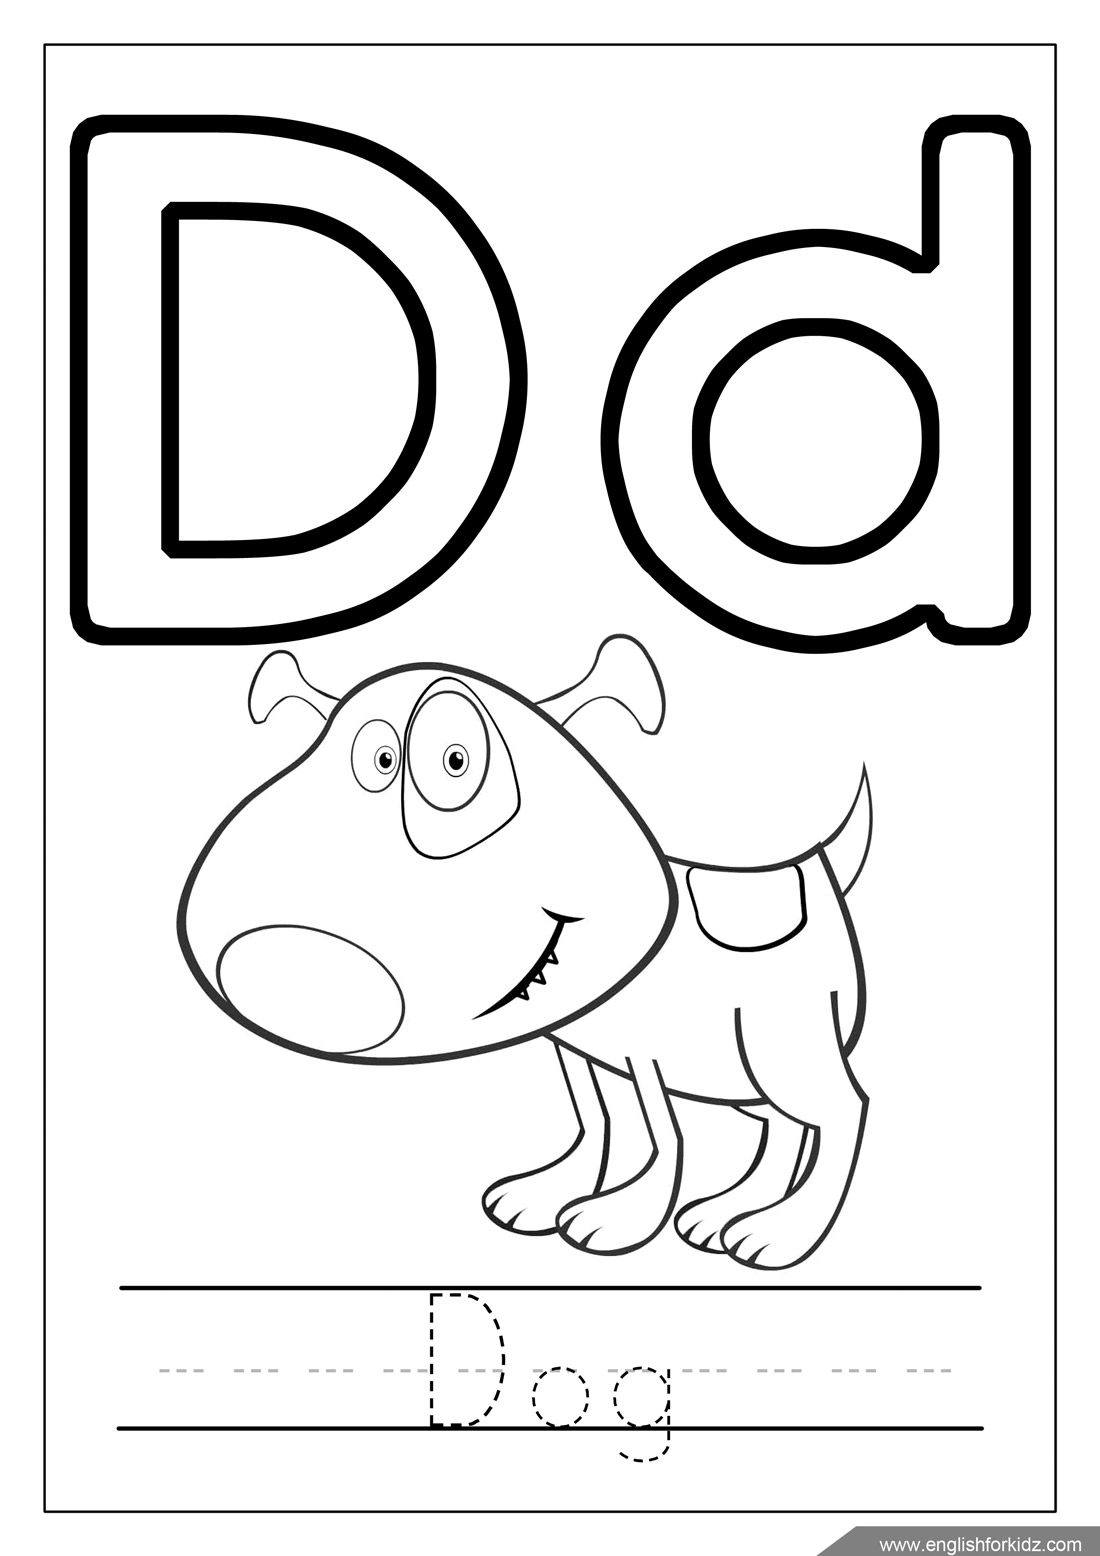 letter-d-is-for-duck-coloring-page-free-printable-coloring-pages